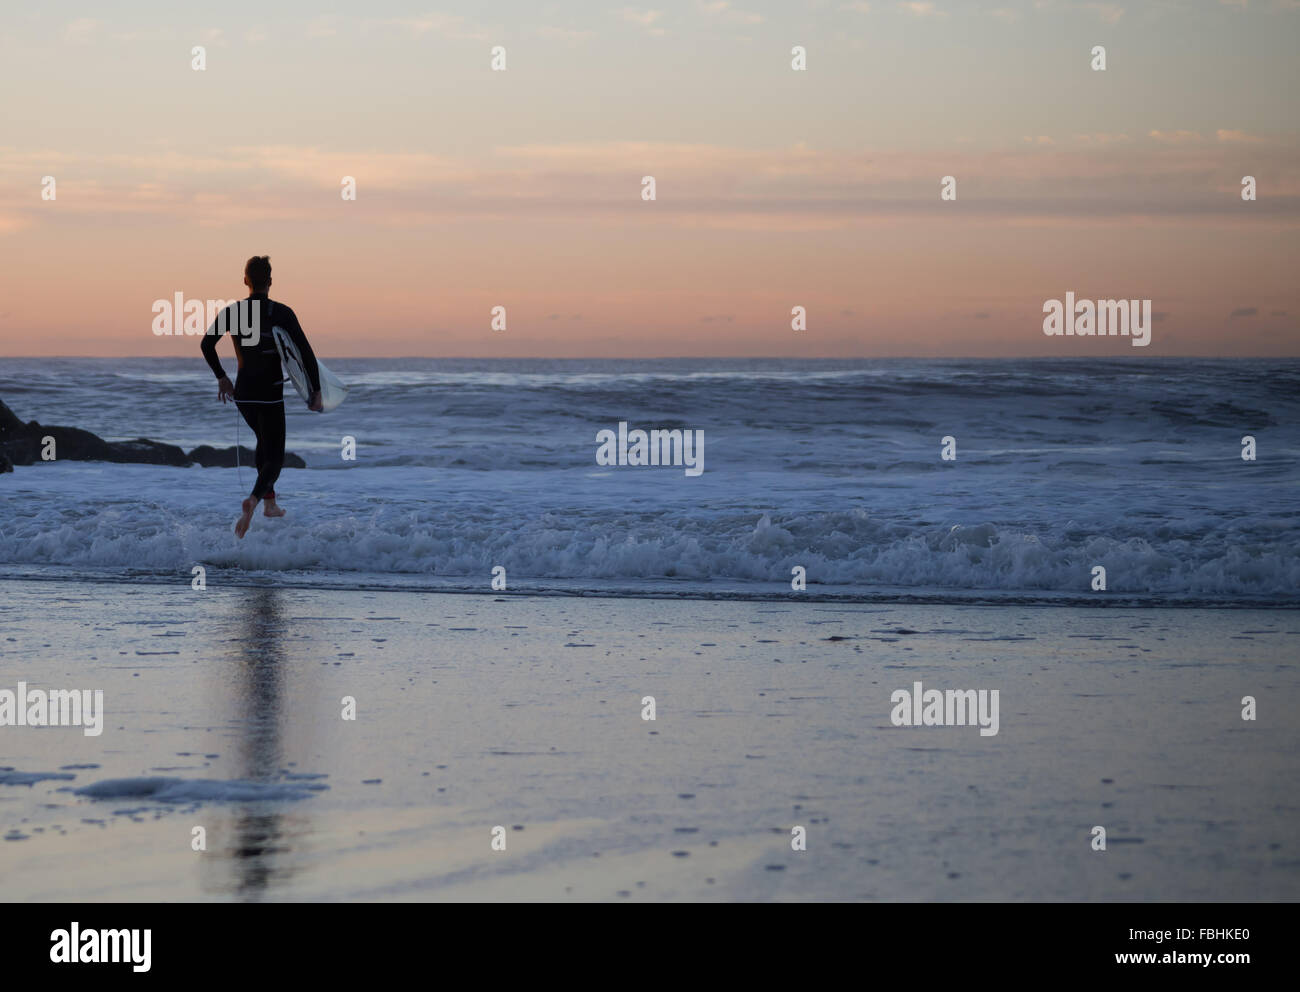 Surfer dashing out to the line up in an early morning surf session at Rockaway Beach, Queens, New York. Photographed on October Stock Photo